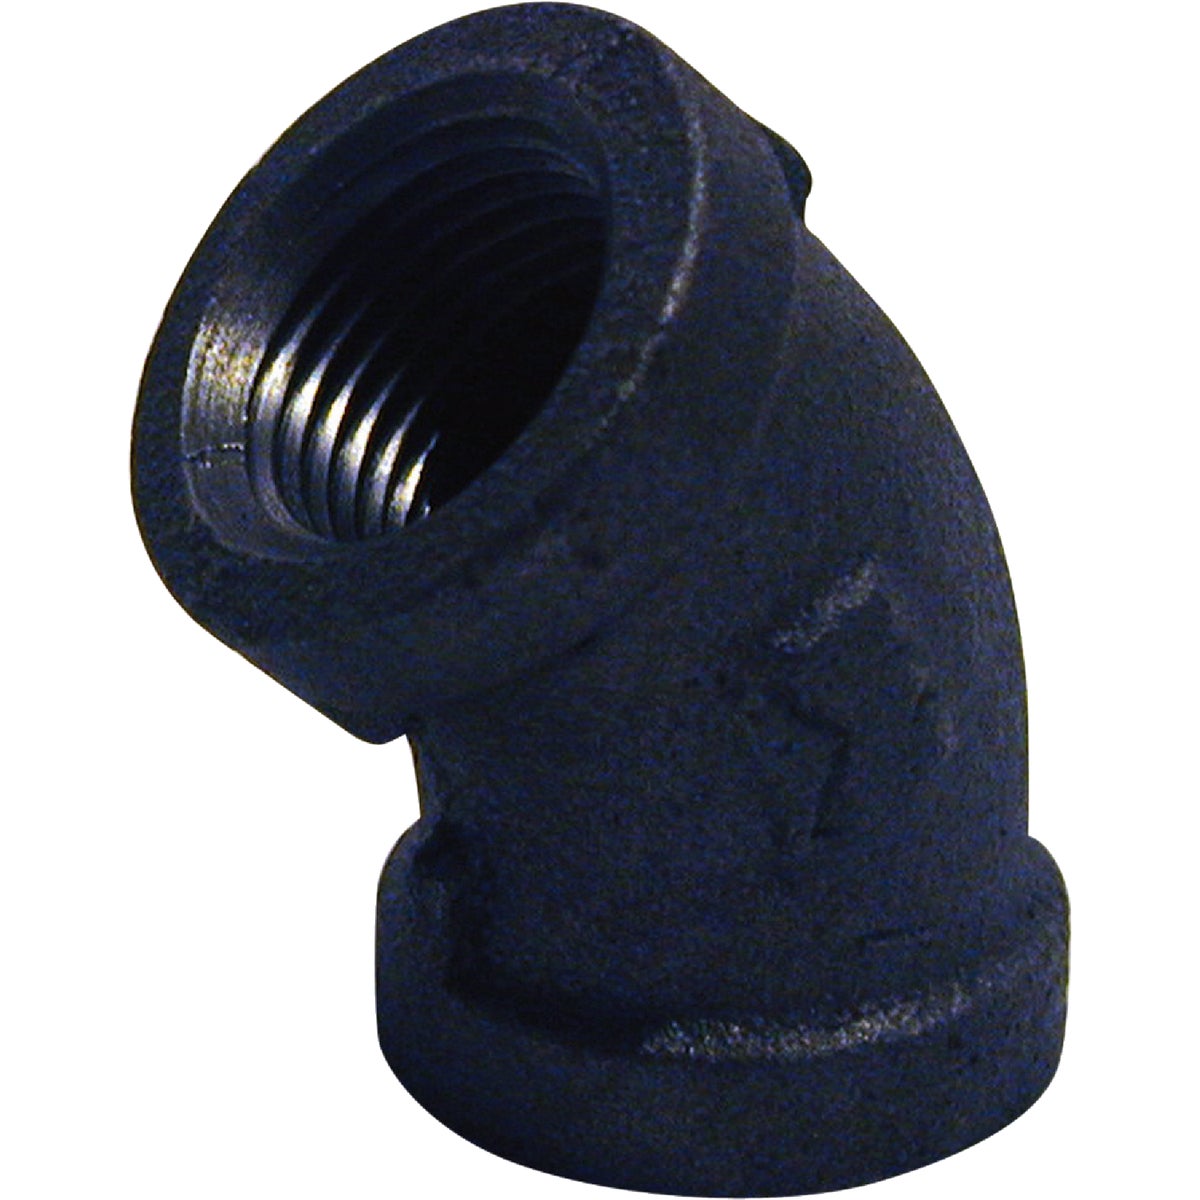 Southland 1-1/2 In. 45 Deg. Malleable Black Iron Elbow (1/8 Bend)